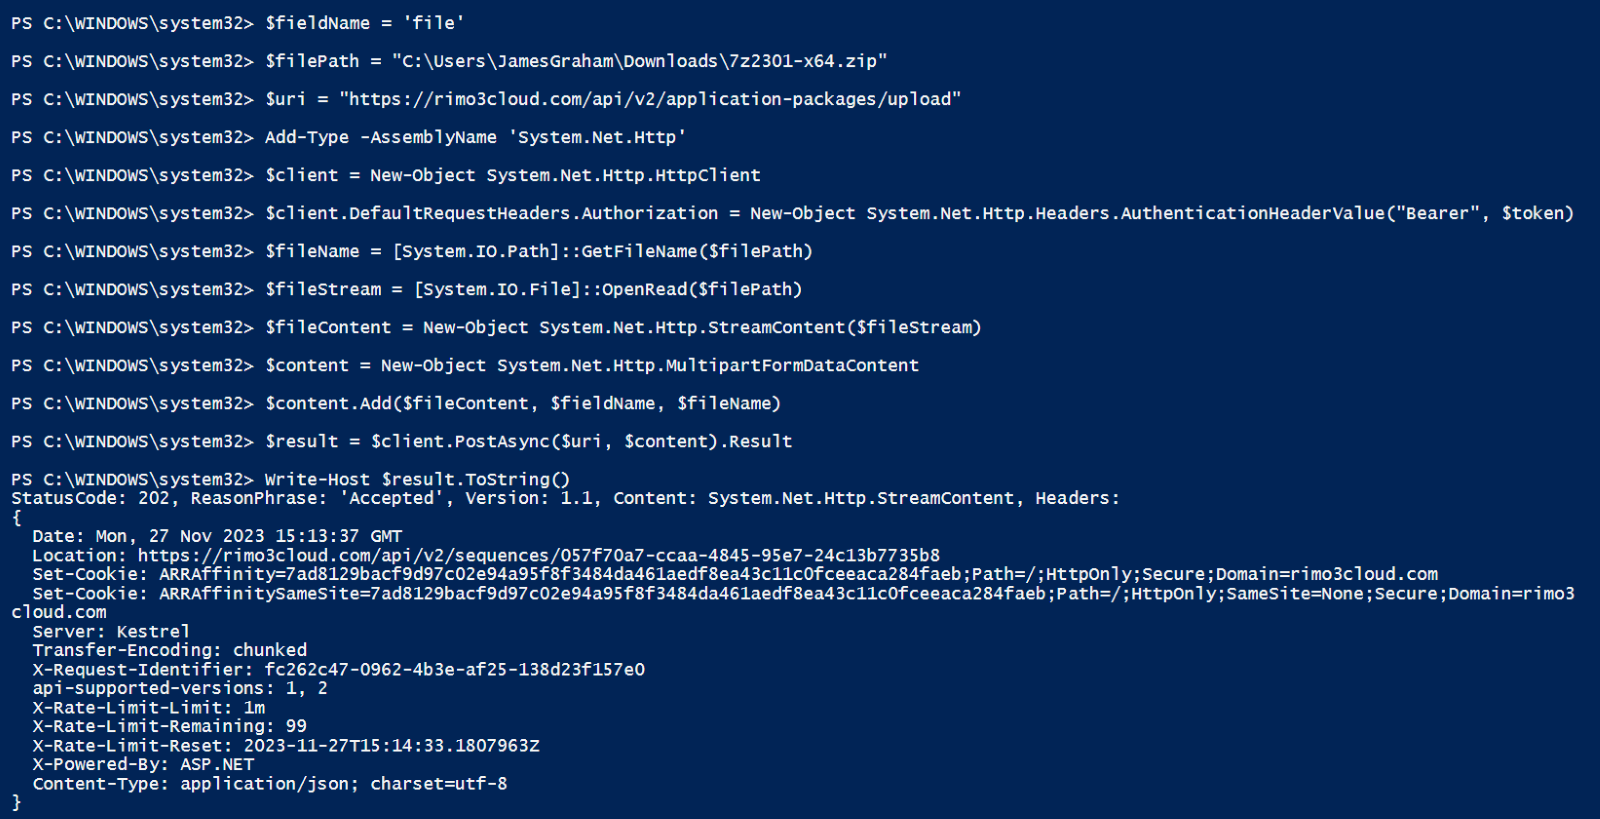 A screenshot of the output of uploading a new package in PowerShell.